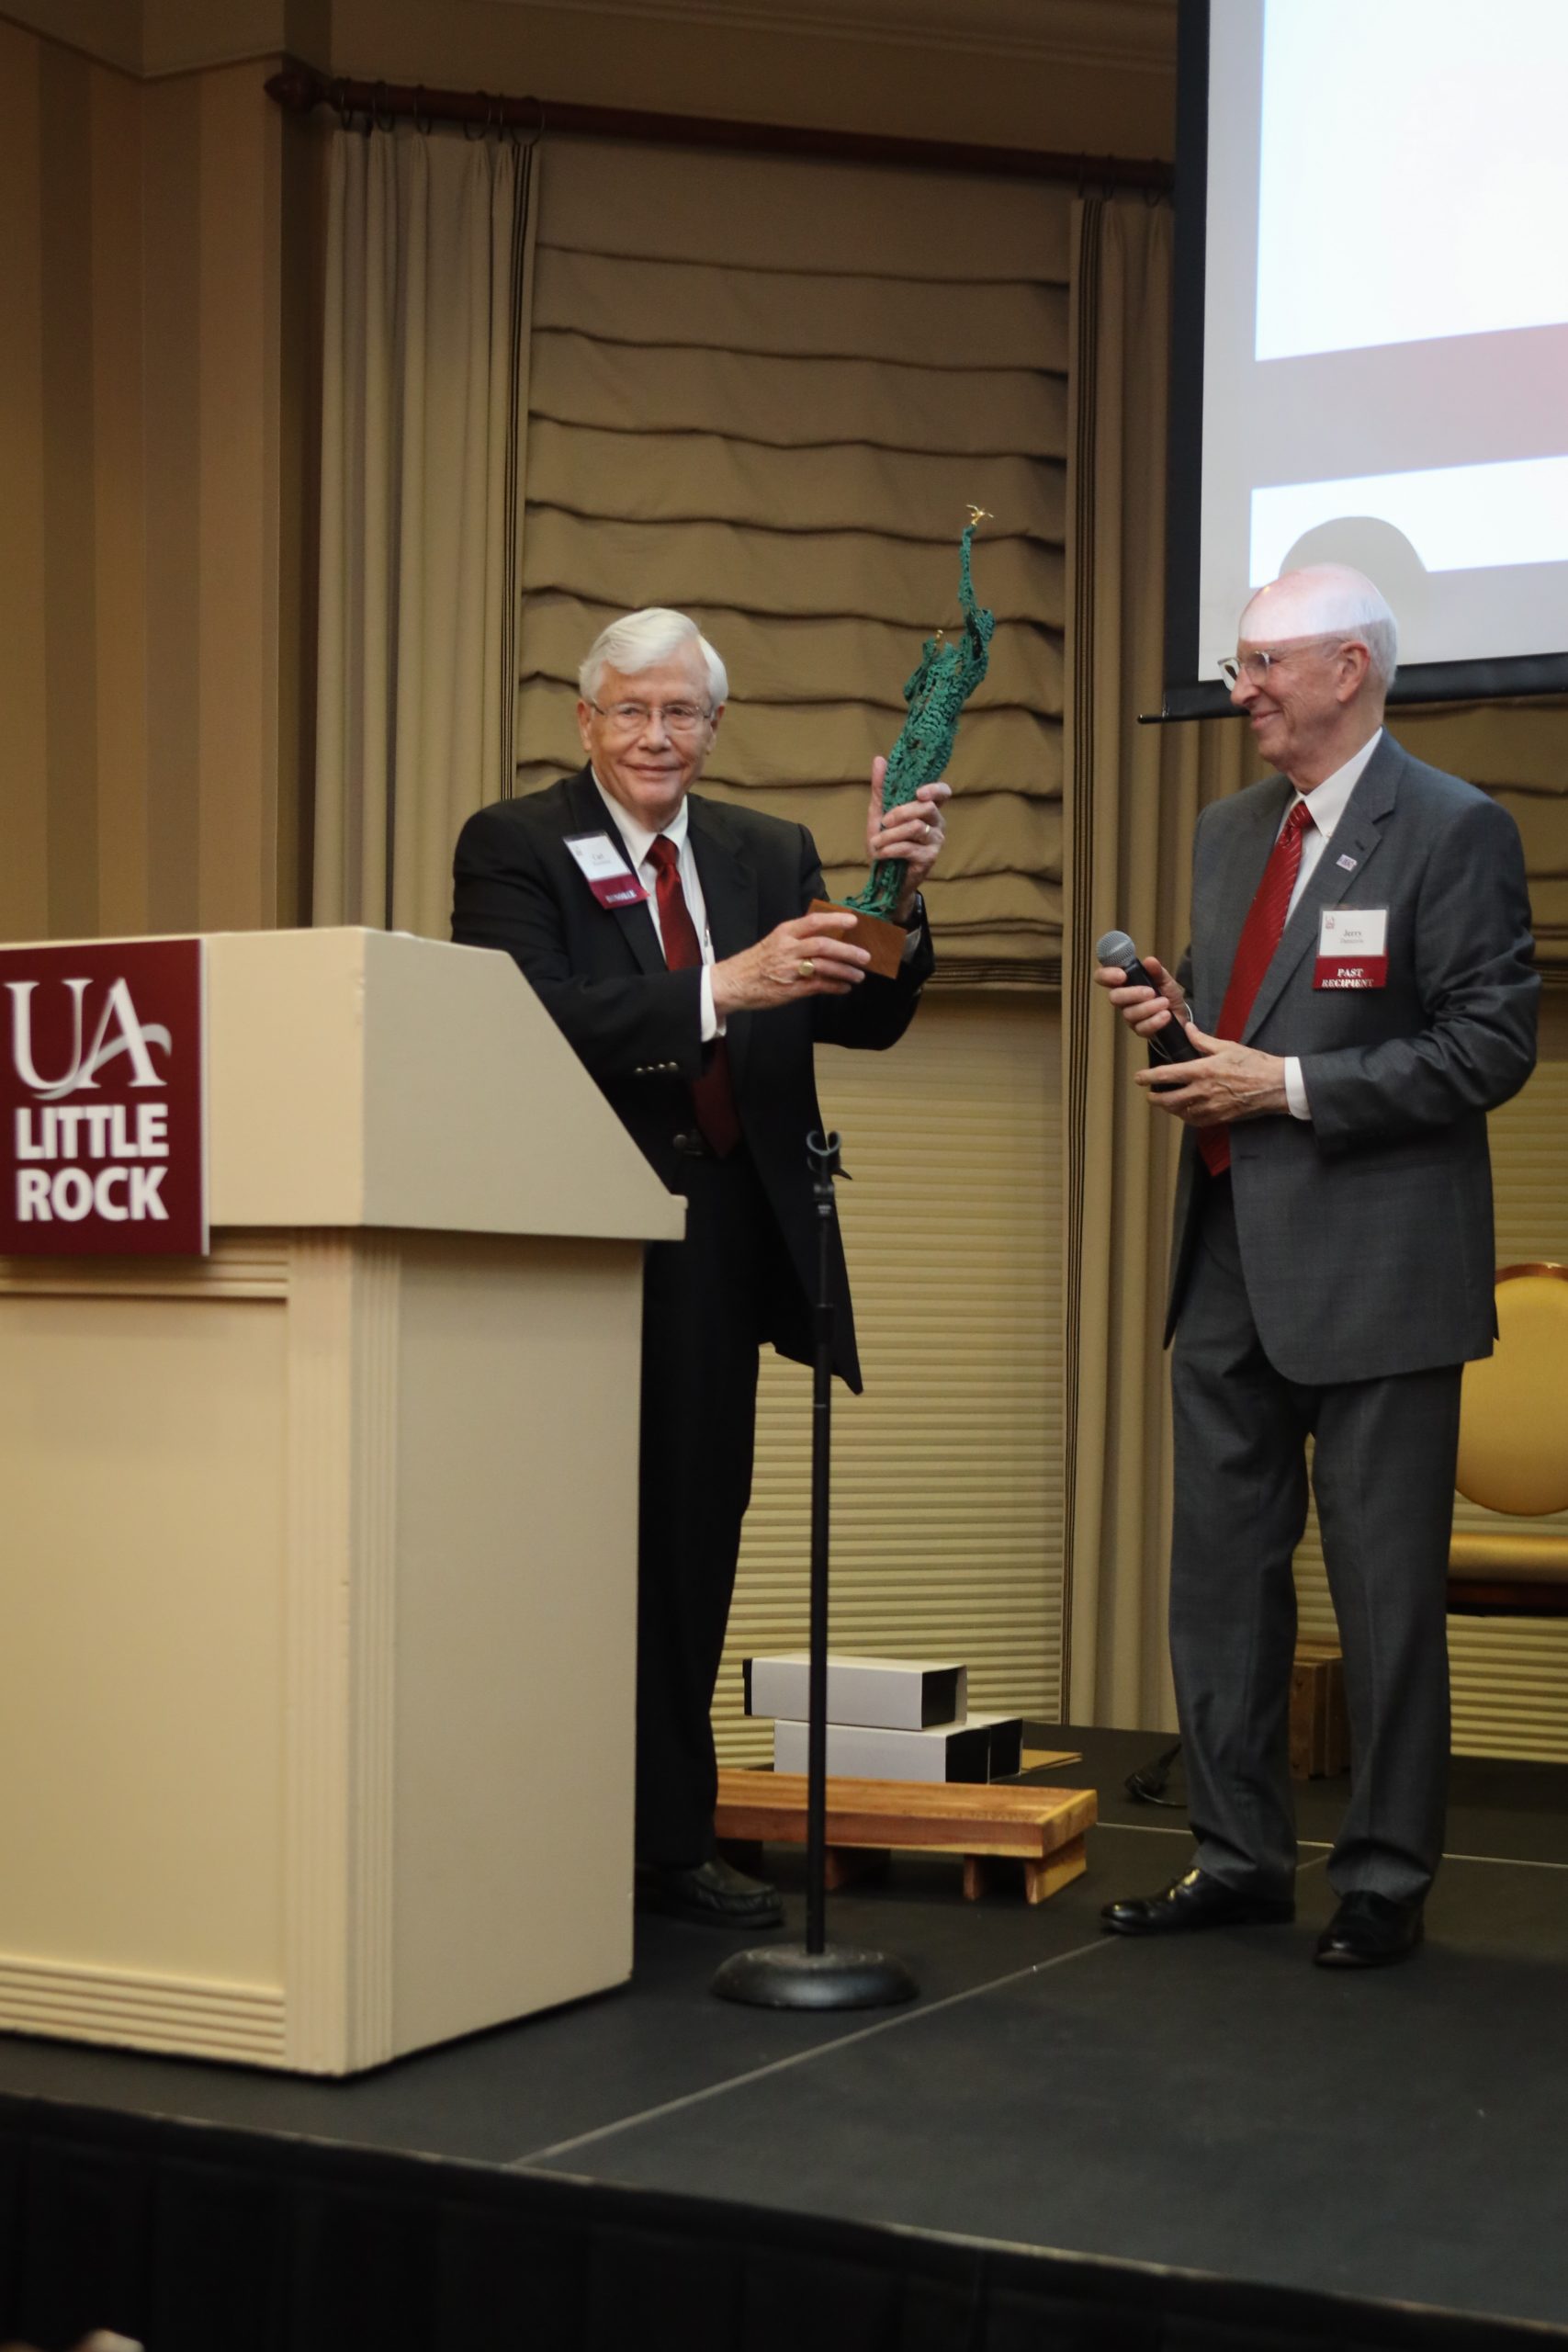 Jerry Damerow presents Carl Rosenbaum with the 2021 Fribough Award from UA Little Rock. Photo by Jen Missouri Photography.